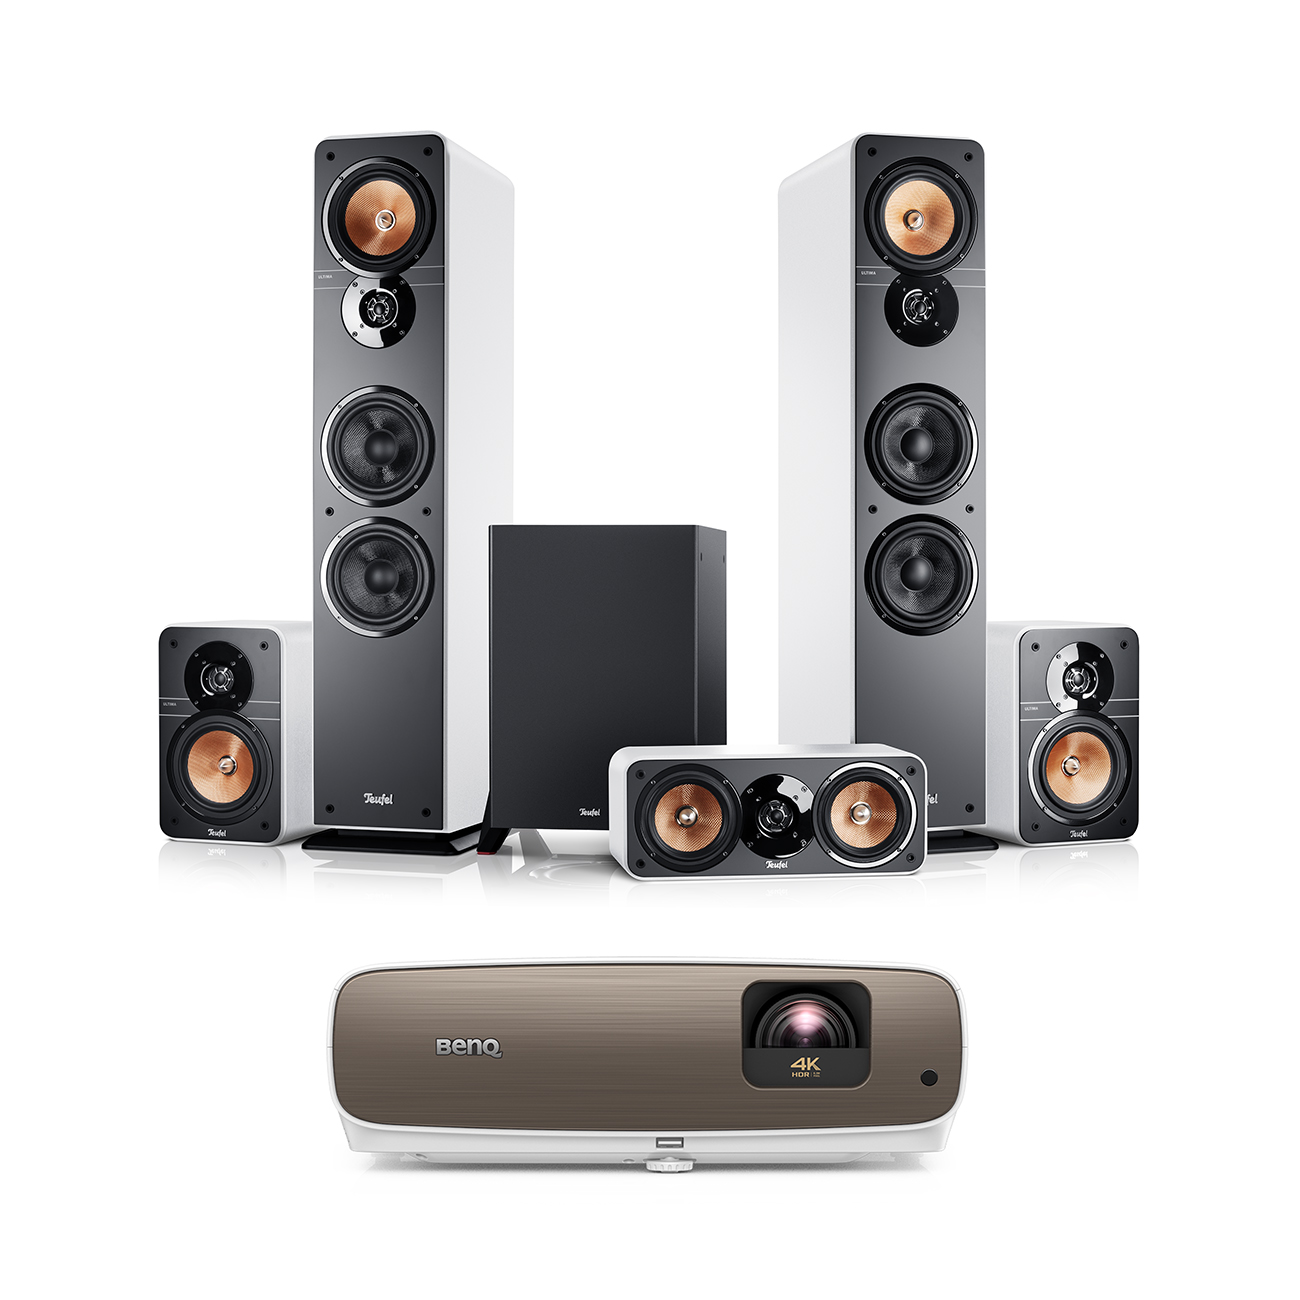 Ultima 40 Surround AVR Dolby Atmos "5.1.2" (2018)